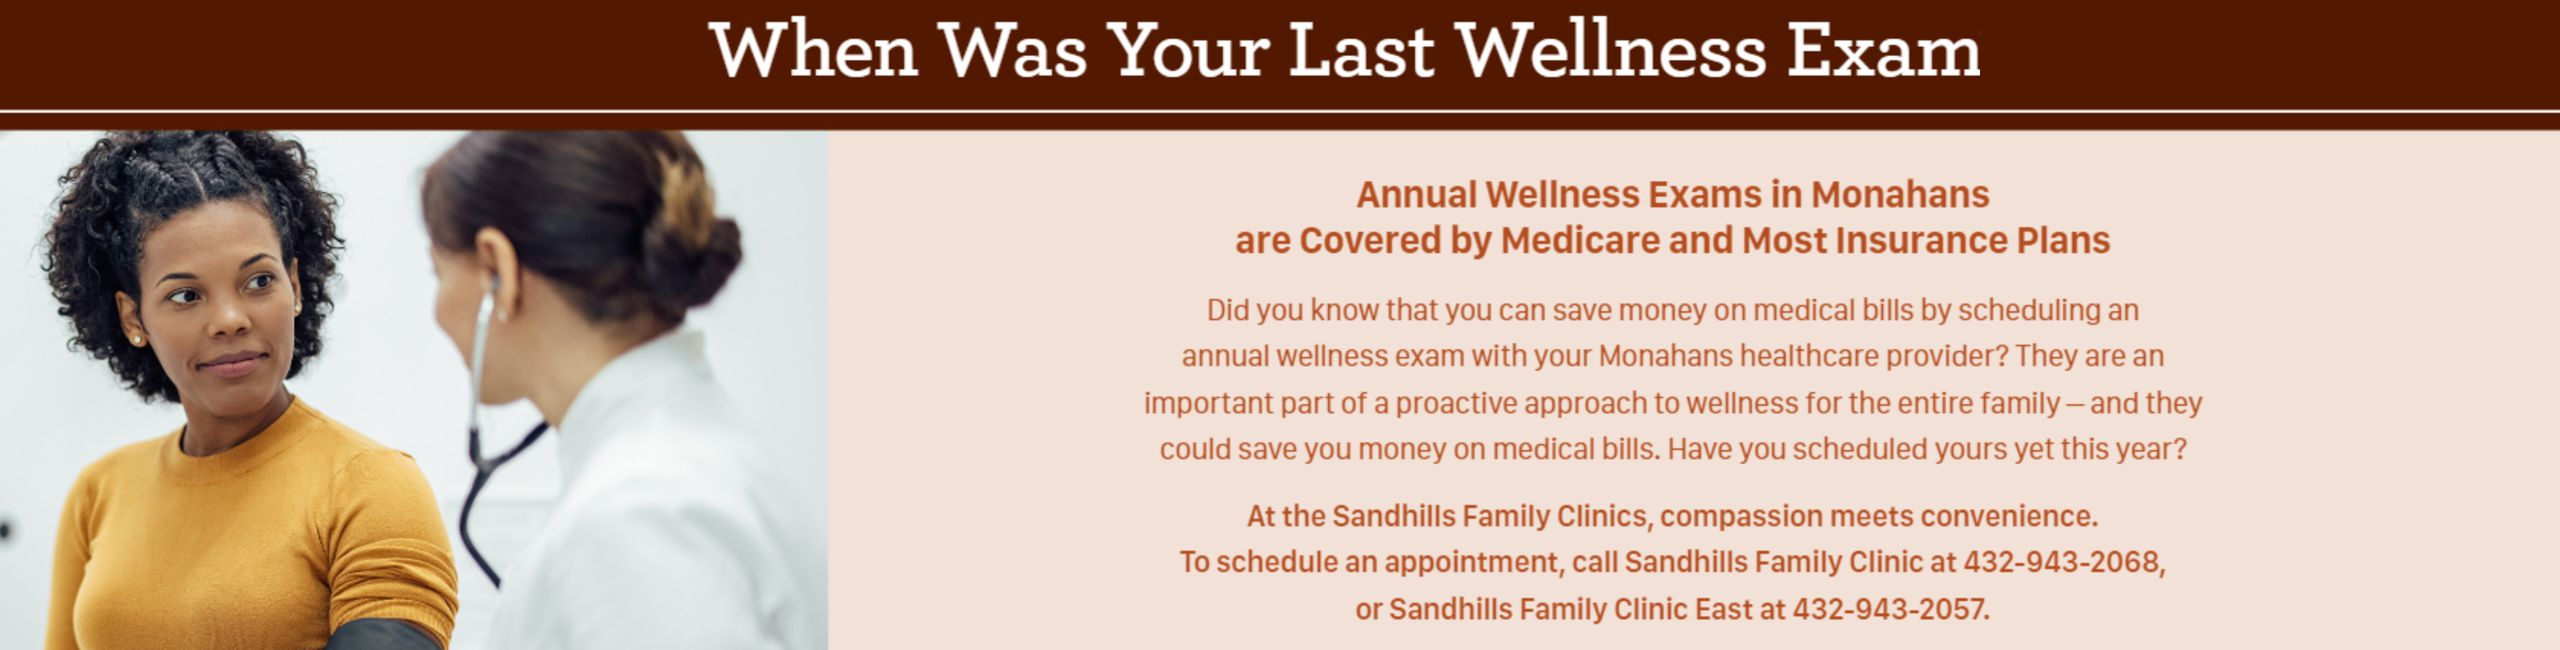 When Was Your Last Wellness Exam

Annual Wellness Exam in Monahans are Covered by Medicare and Most Insurance Plans

Did you know that you can save money on medical bills by scheduling an annual wellness exam with your Monahans healthcare providers? They are an important part of a proactive approach to wellness for the entire family- and they could save you money on medical bills. Have you scheduled yours yet this year?

At the Sandhills Family Clinics, compassion meets convenience. To schedule an appointment, call Sandhills Family Clinic at 432-943-2068, or Sandhills Family Clinic East at 432-2057.